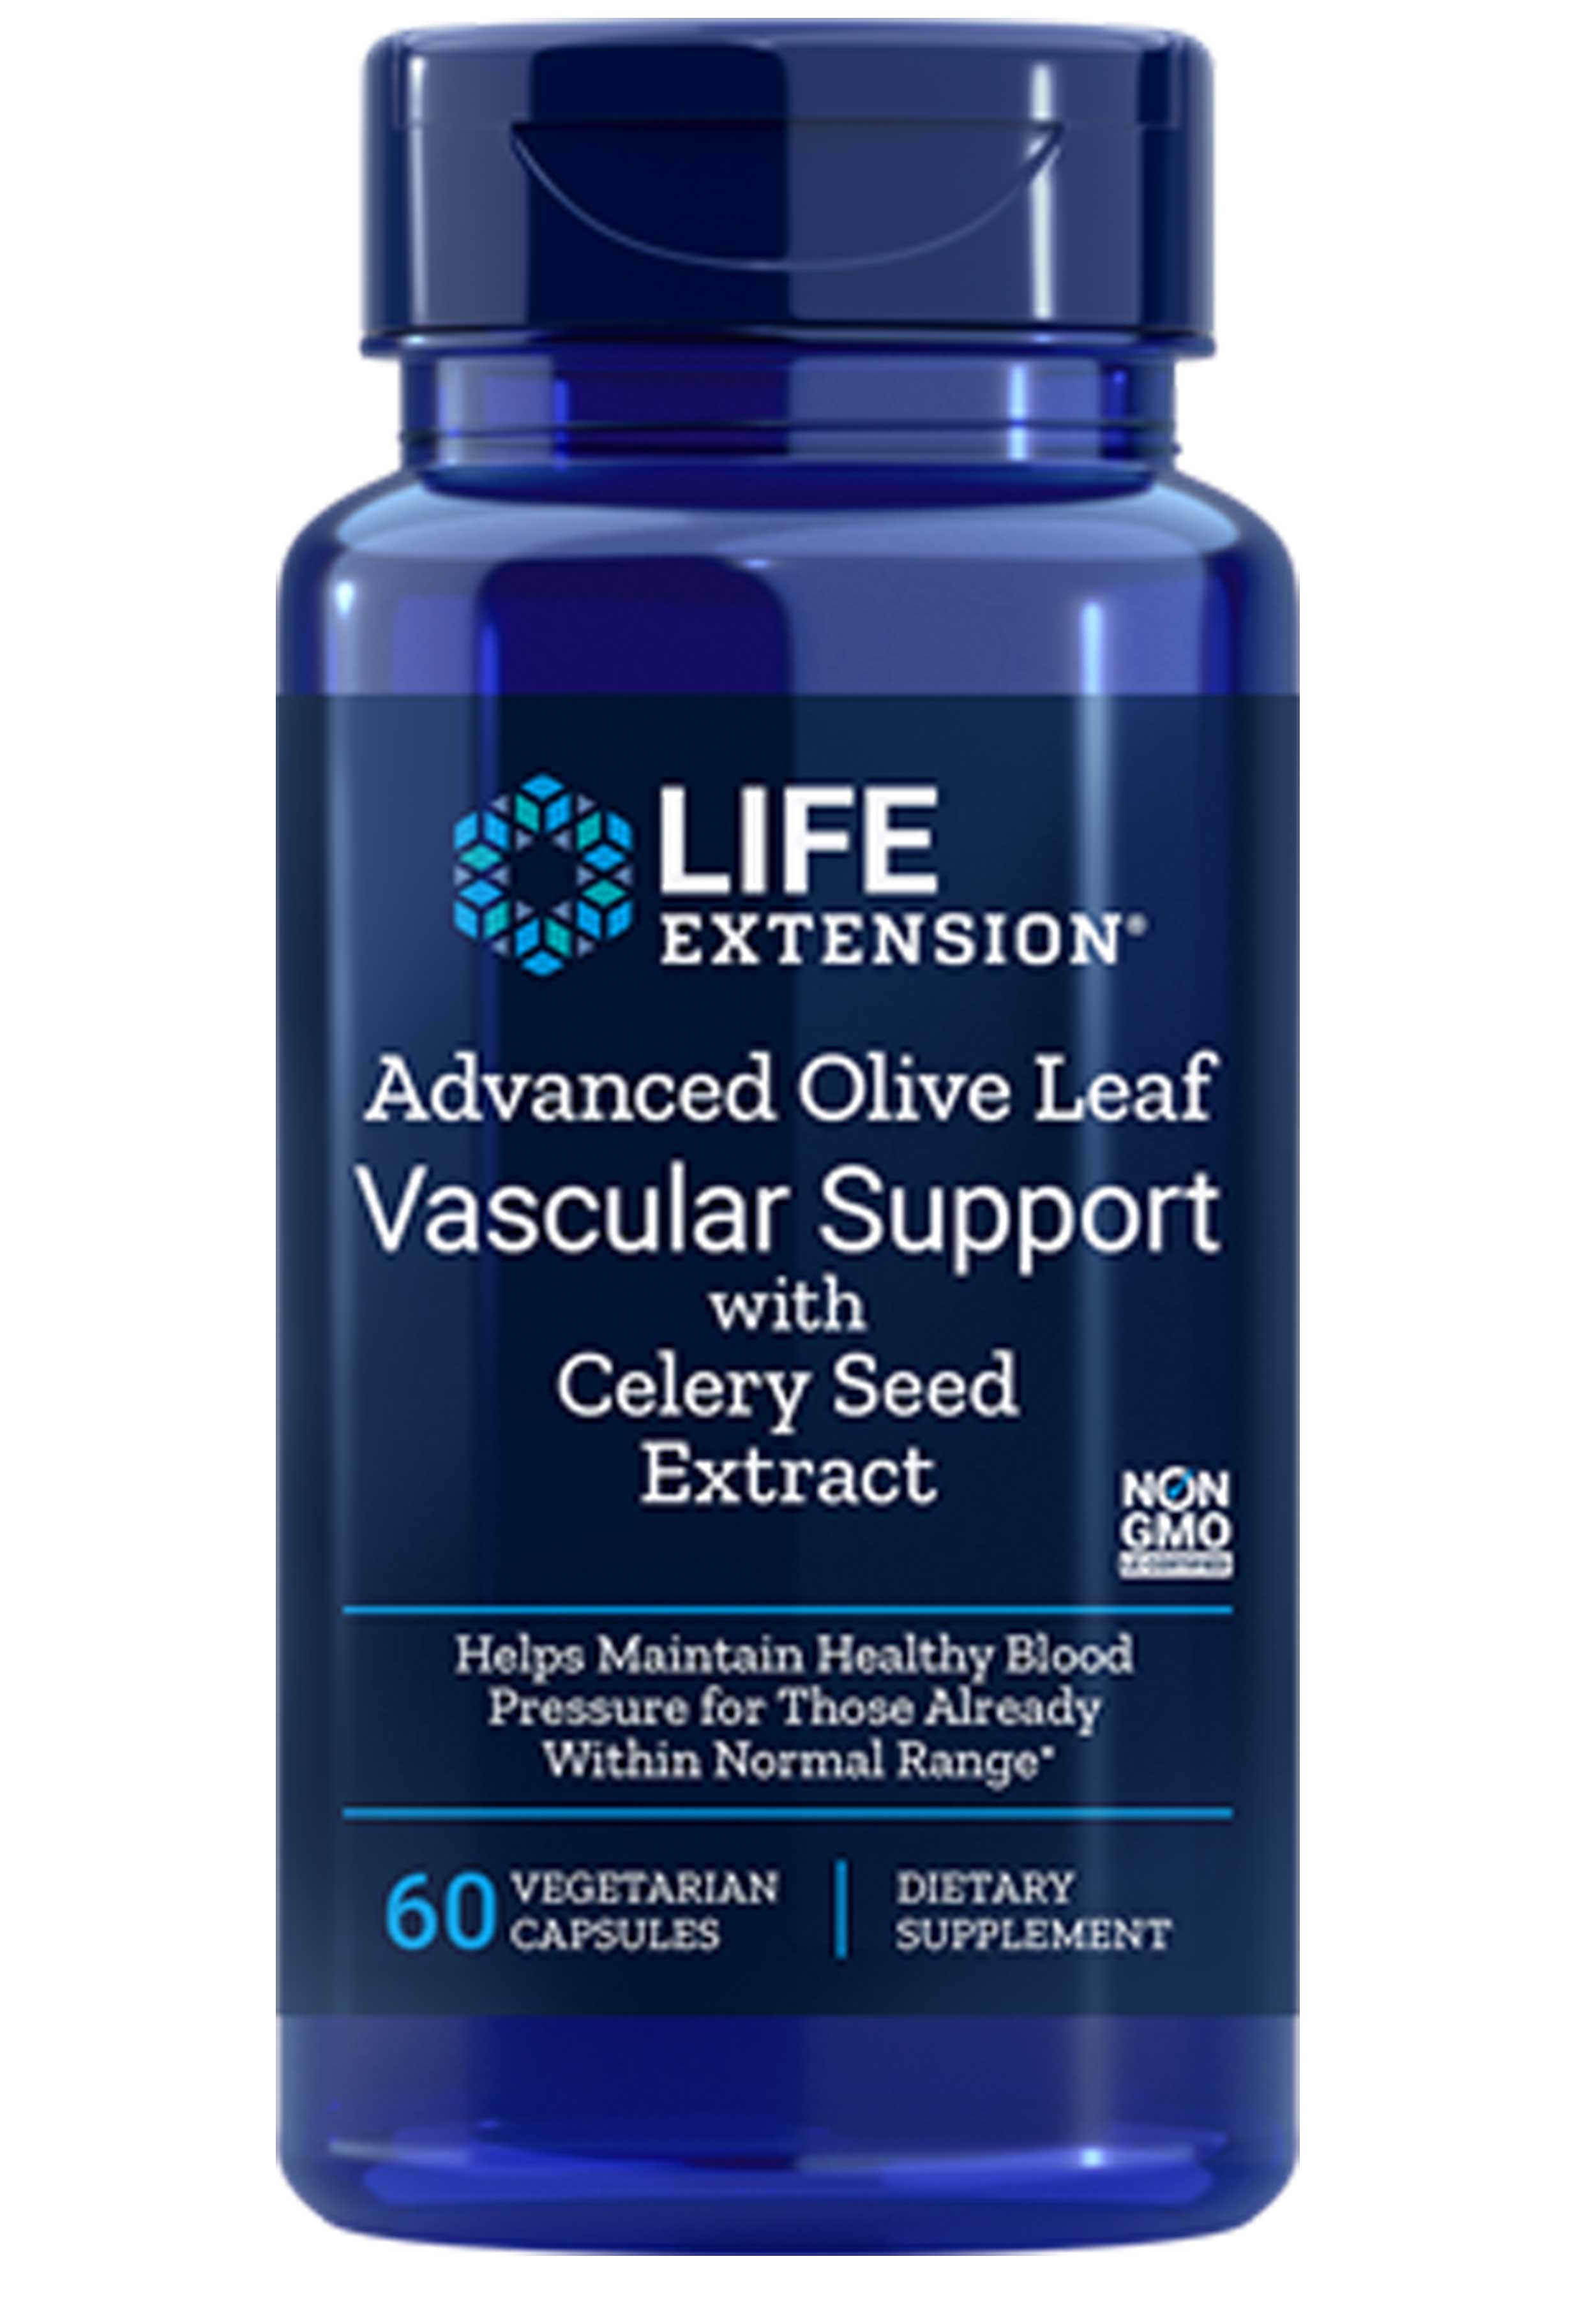 Life Extension Advanced Olive Leaf Vascular Support with Celery Seed Extract